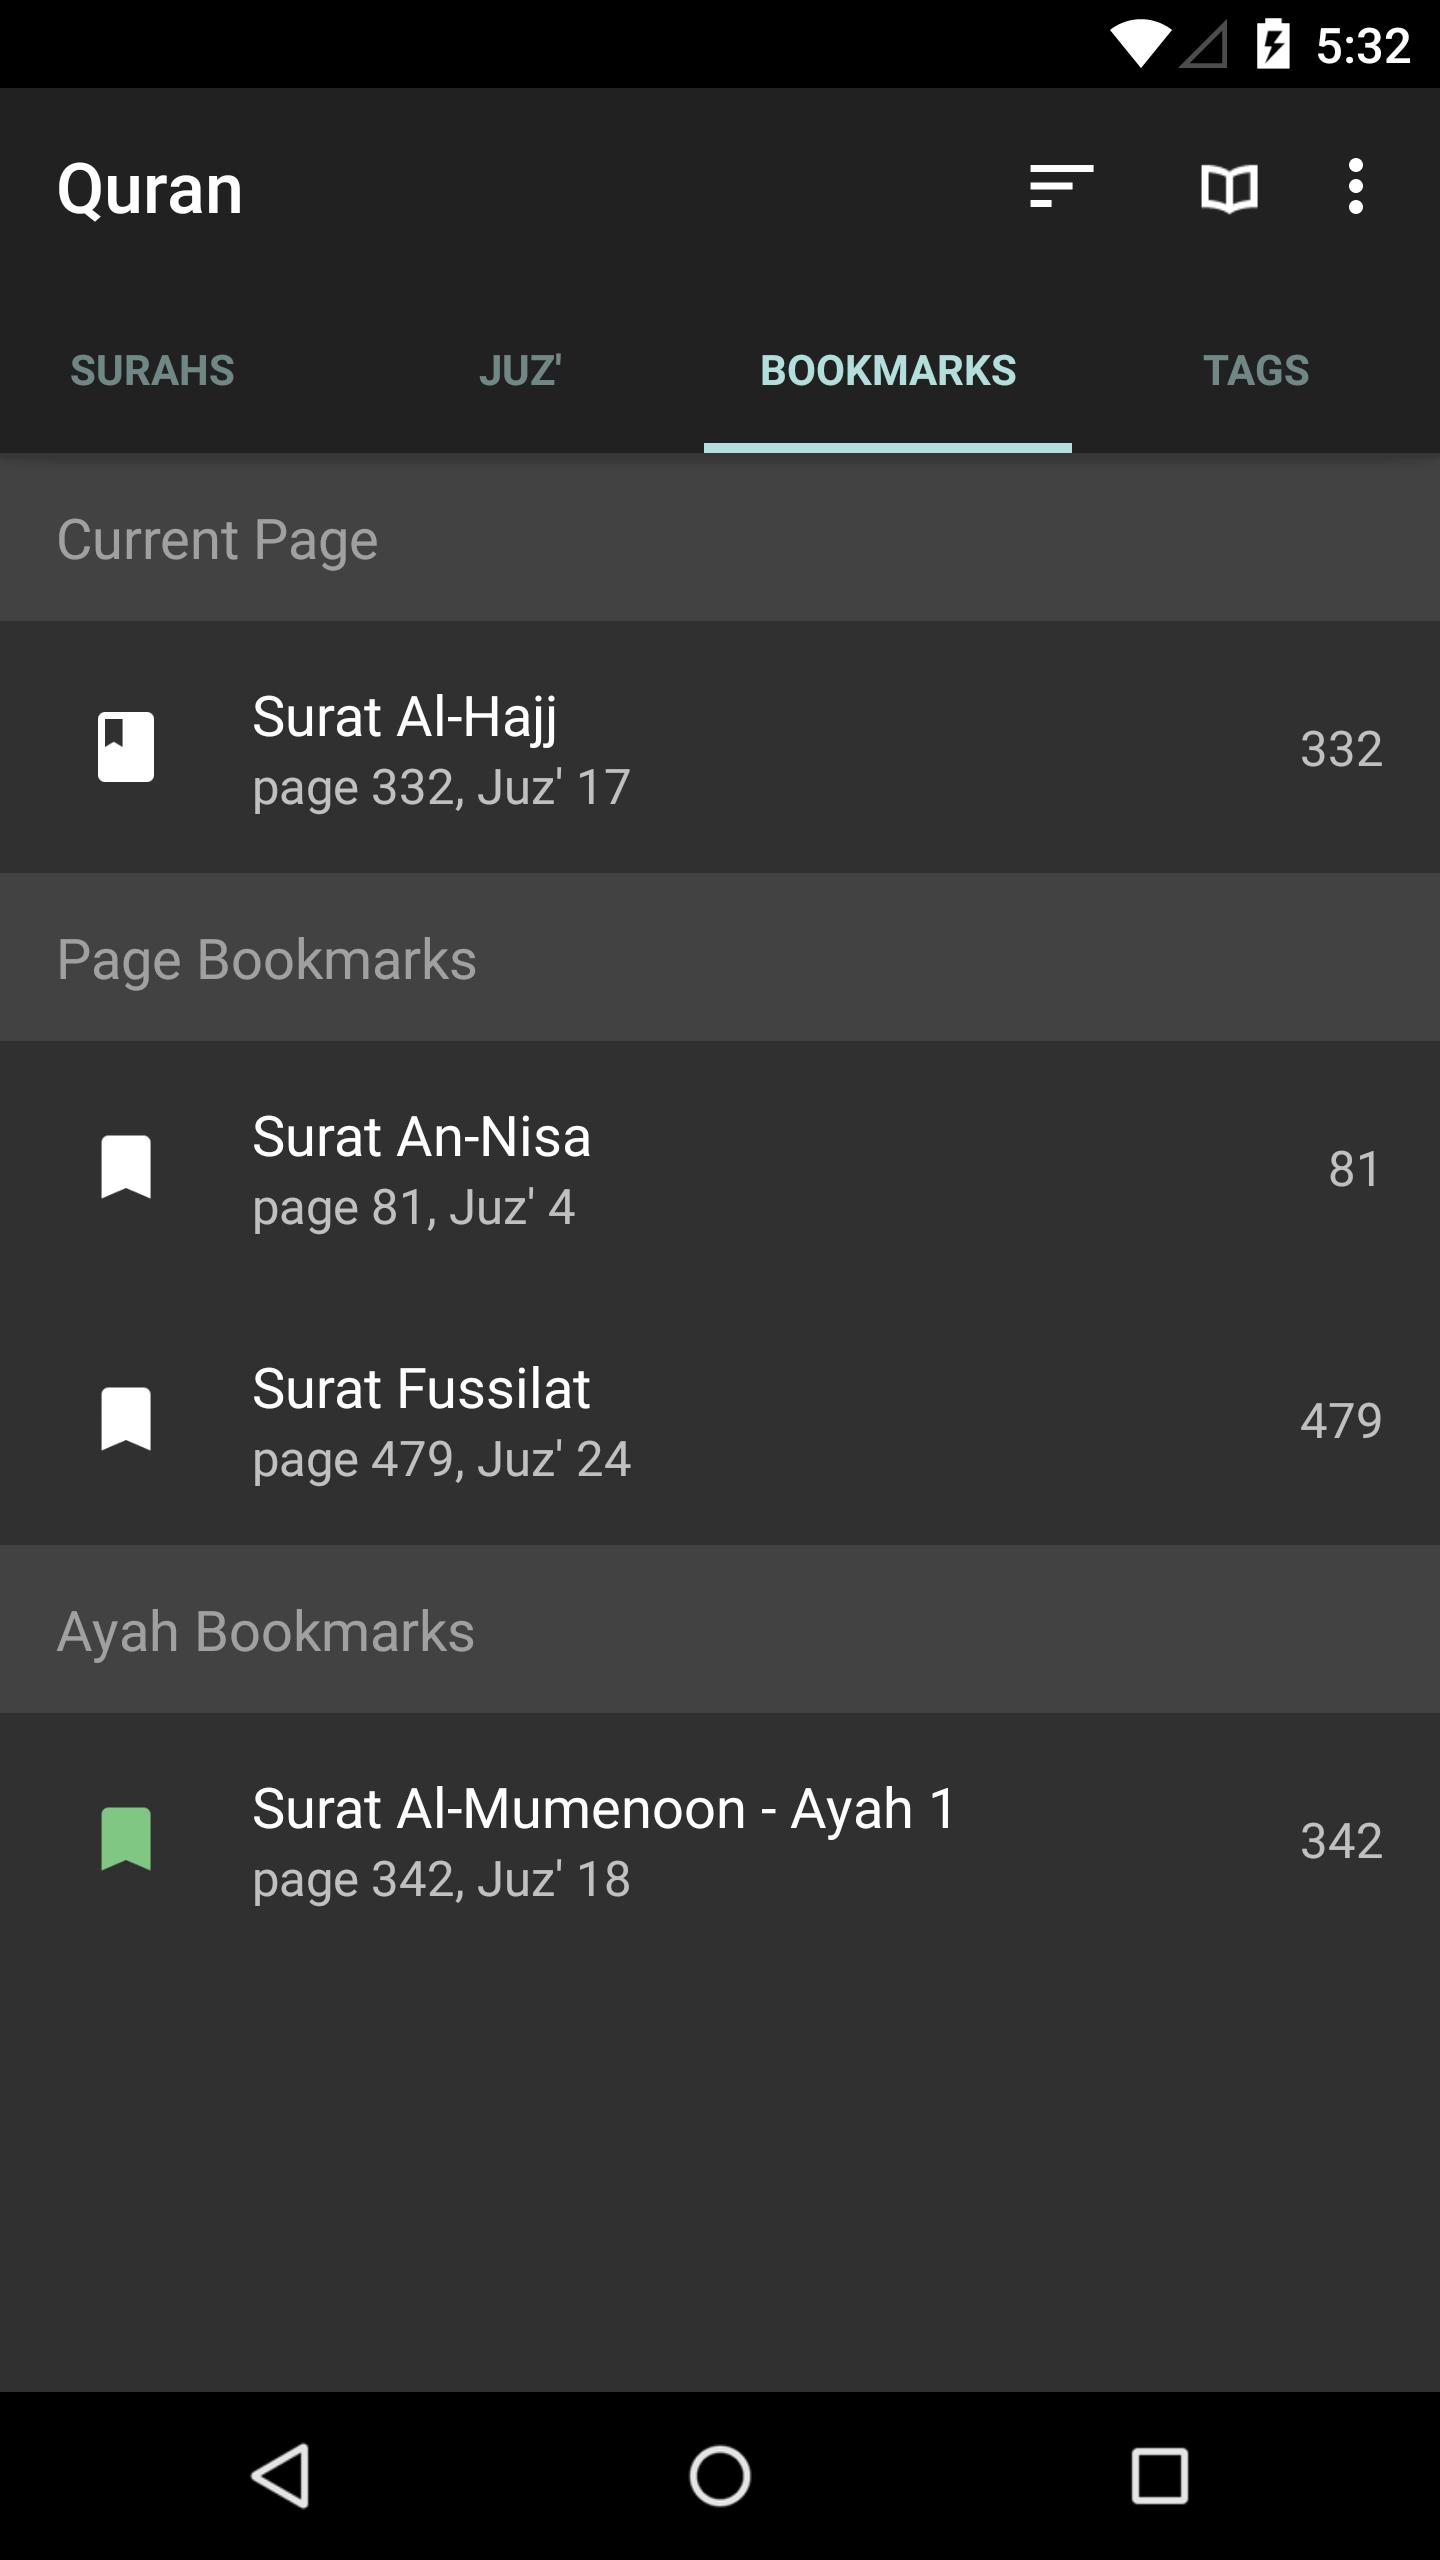 Quran for Android 3.0.2 Screenshot 3